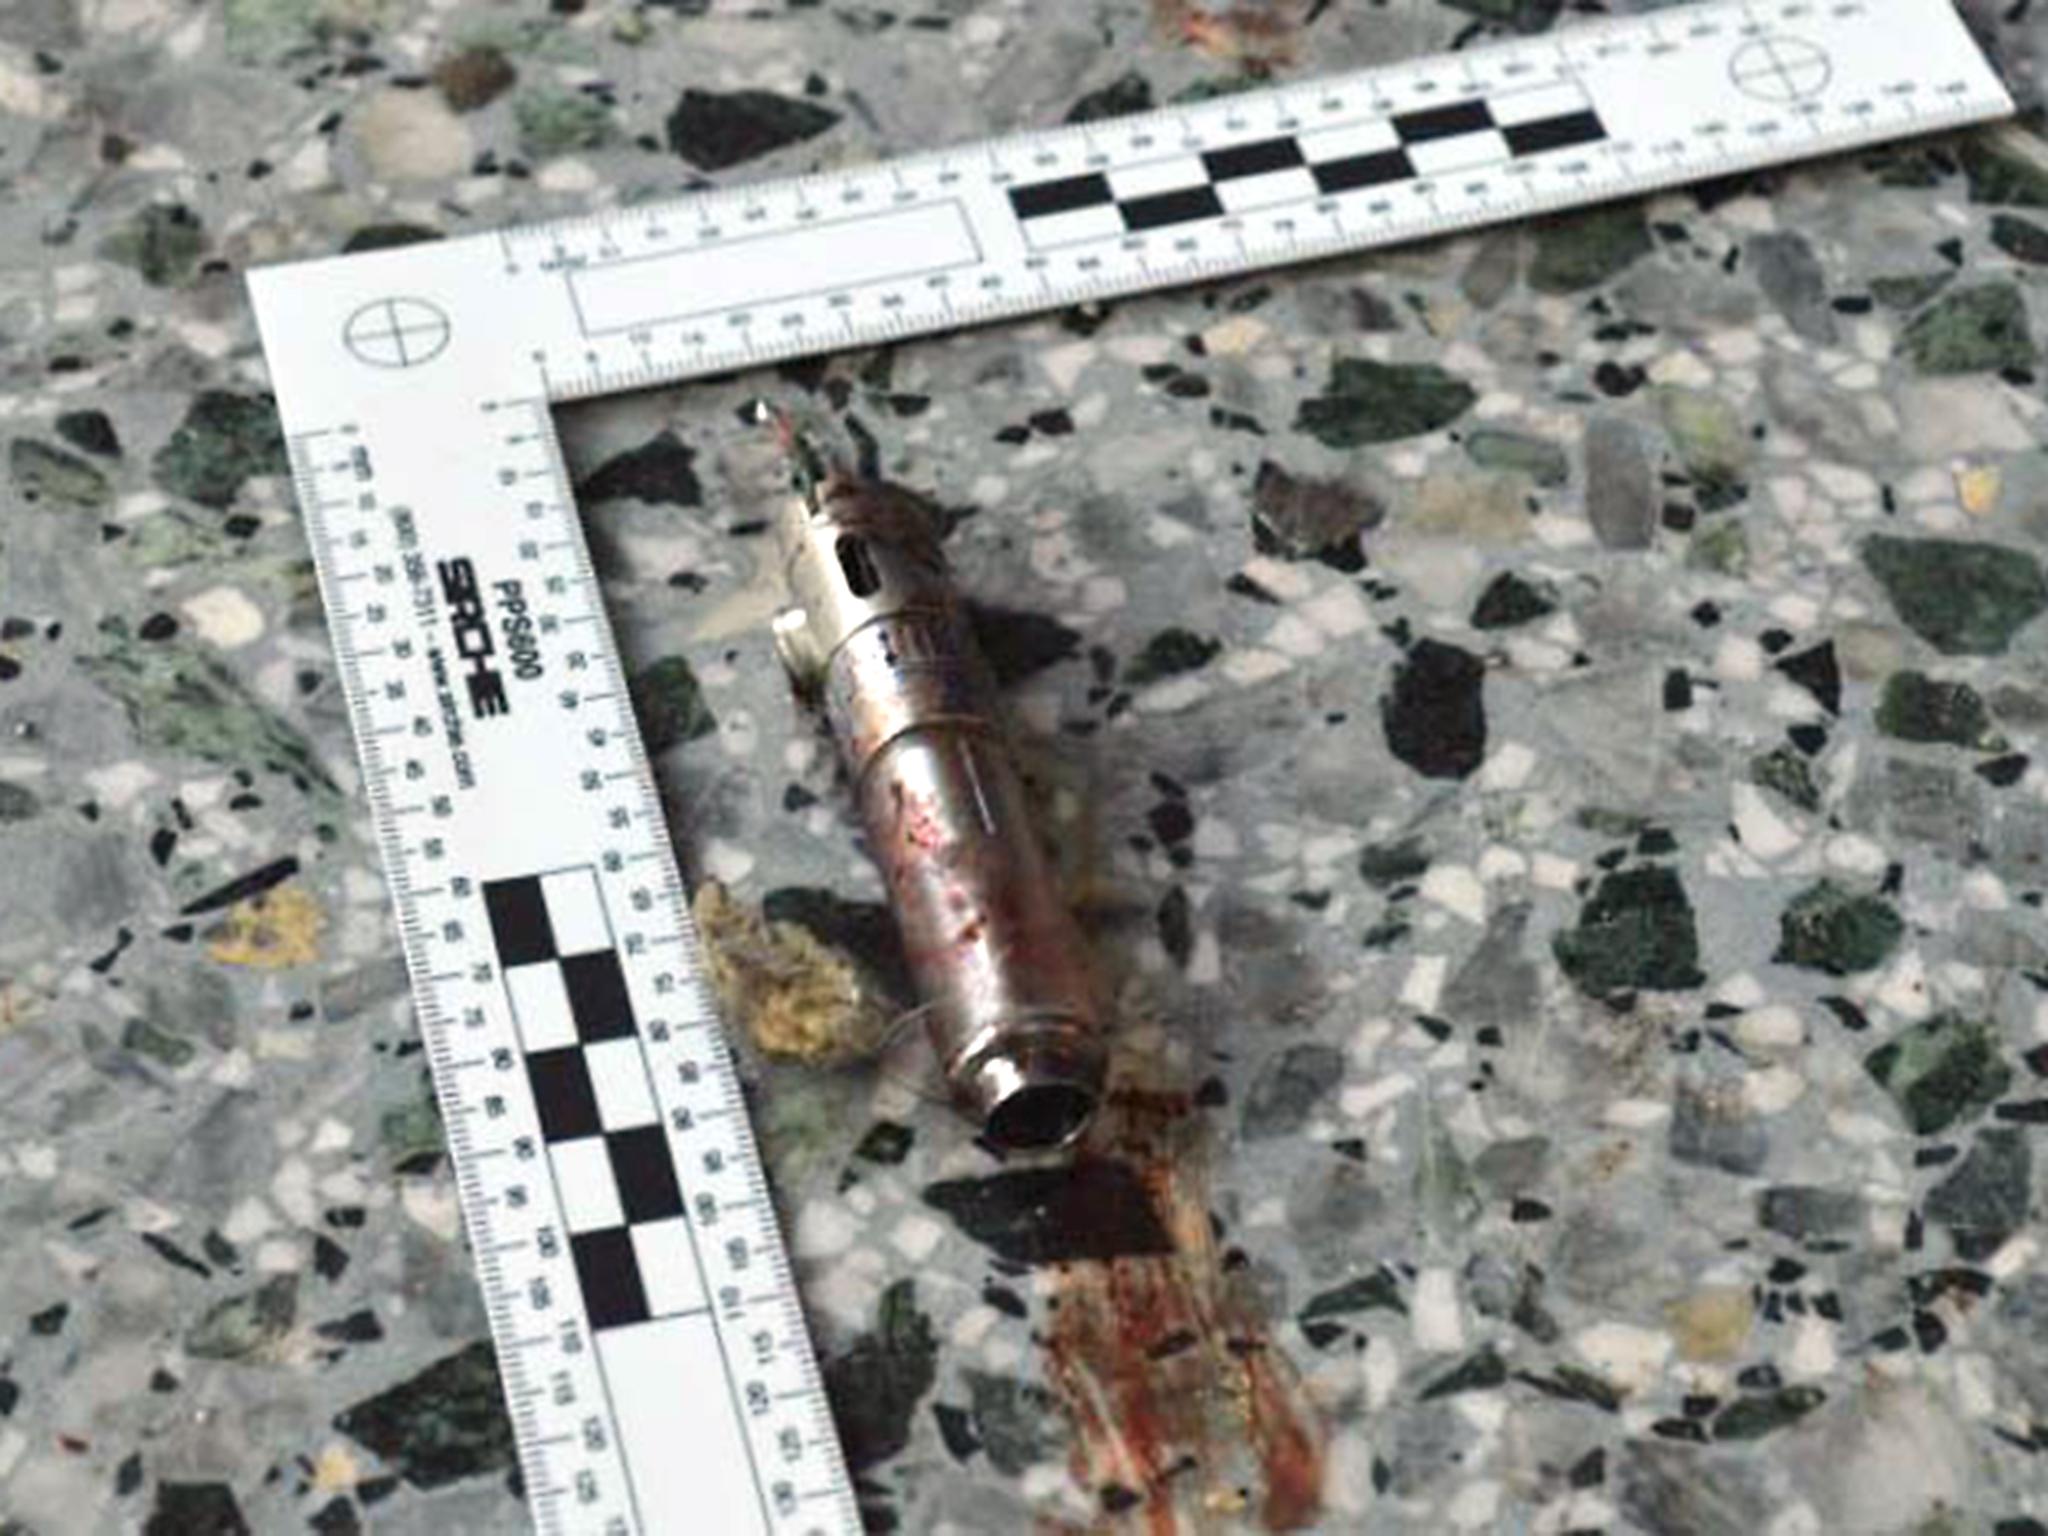 The suspected detonator used to kill 22 people and injure dozens more